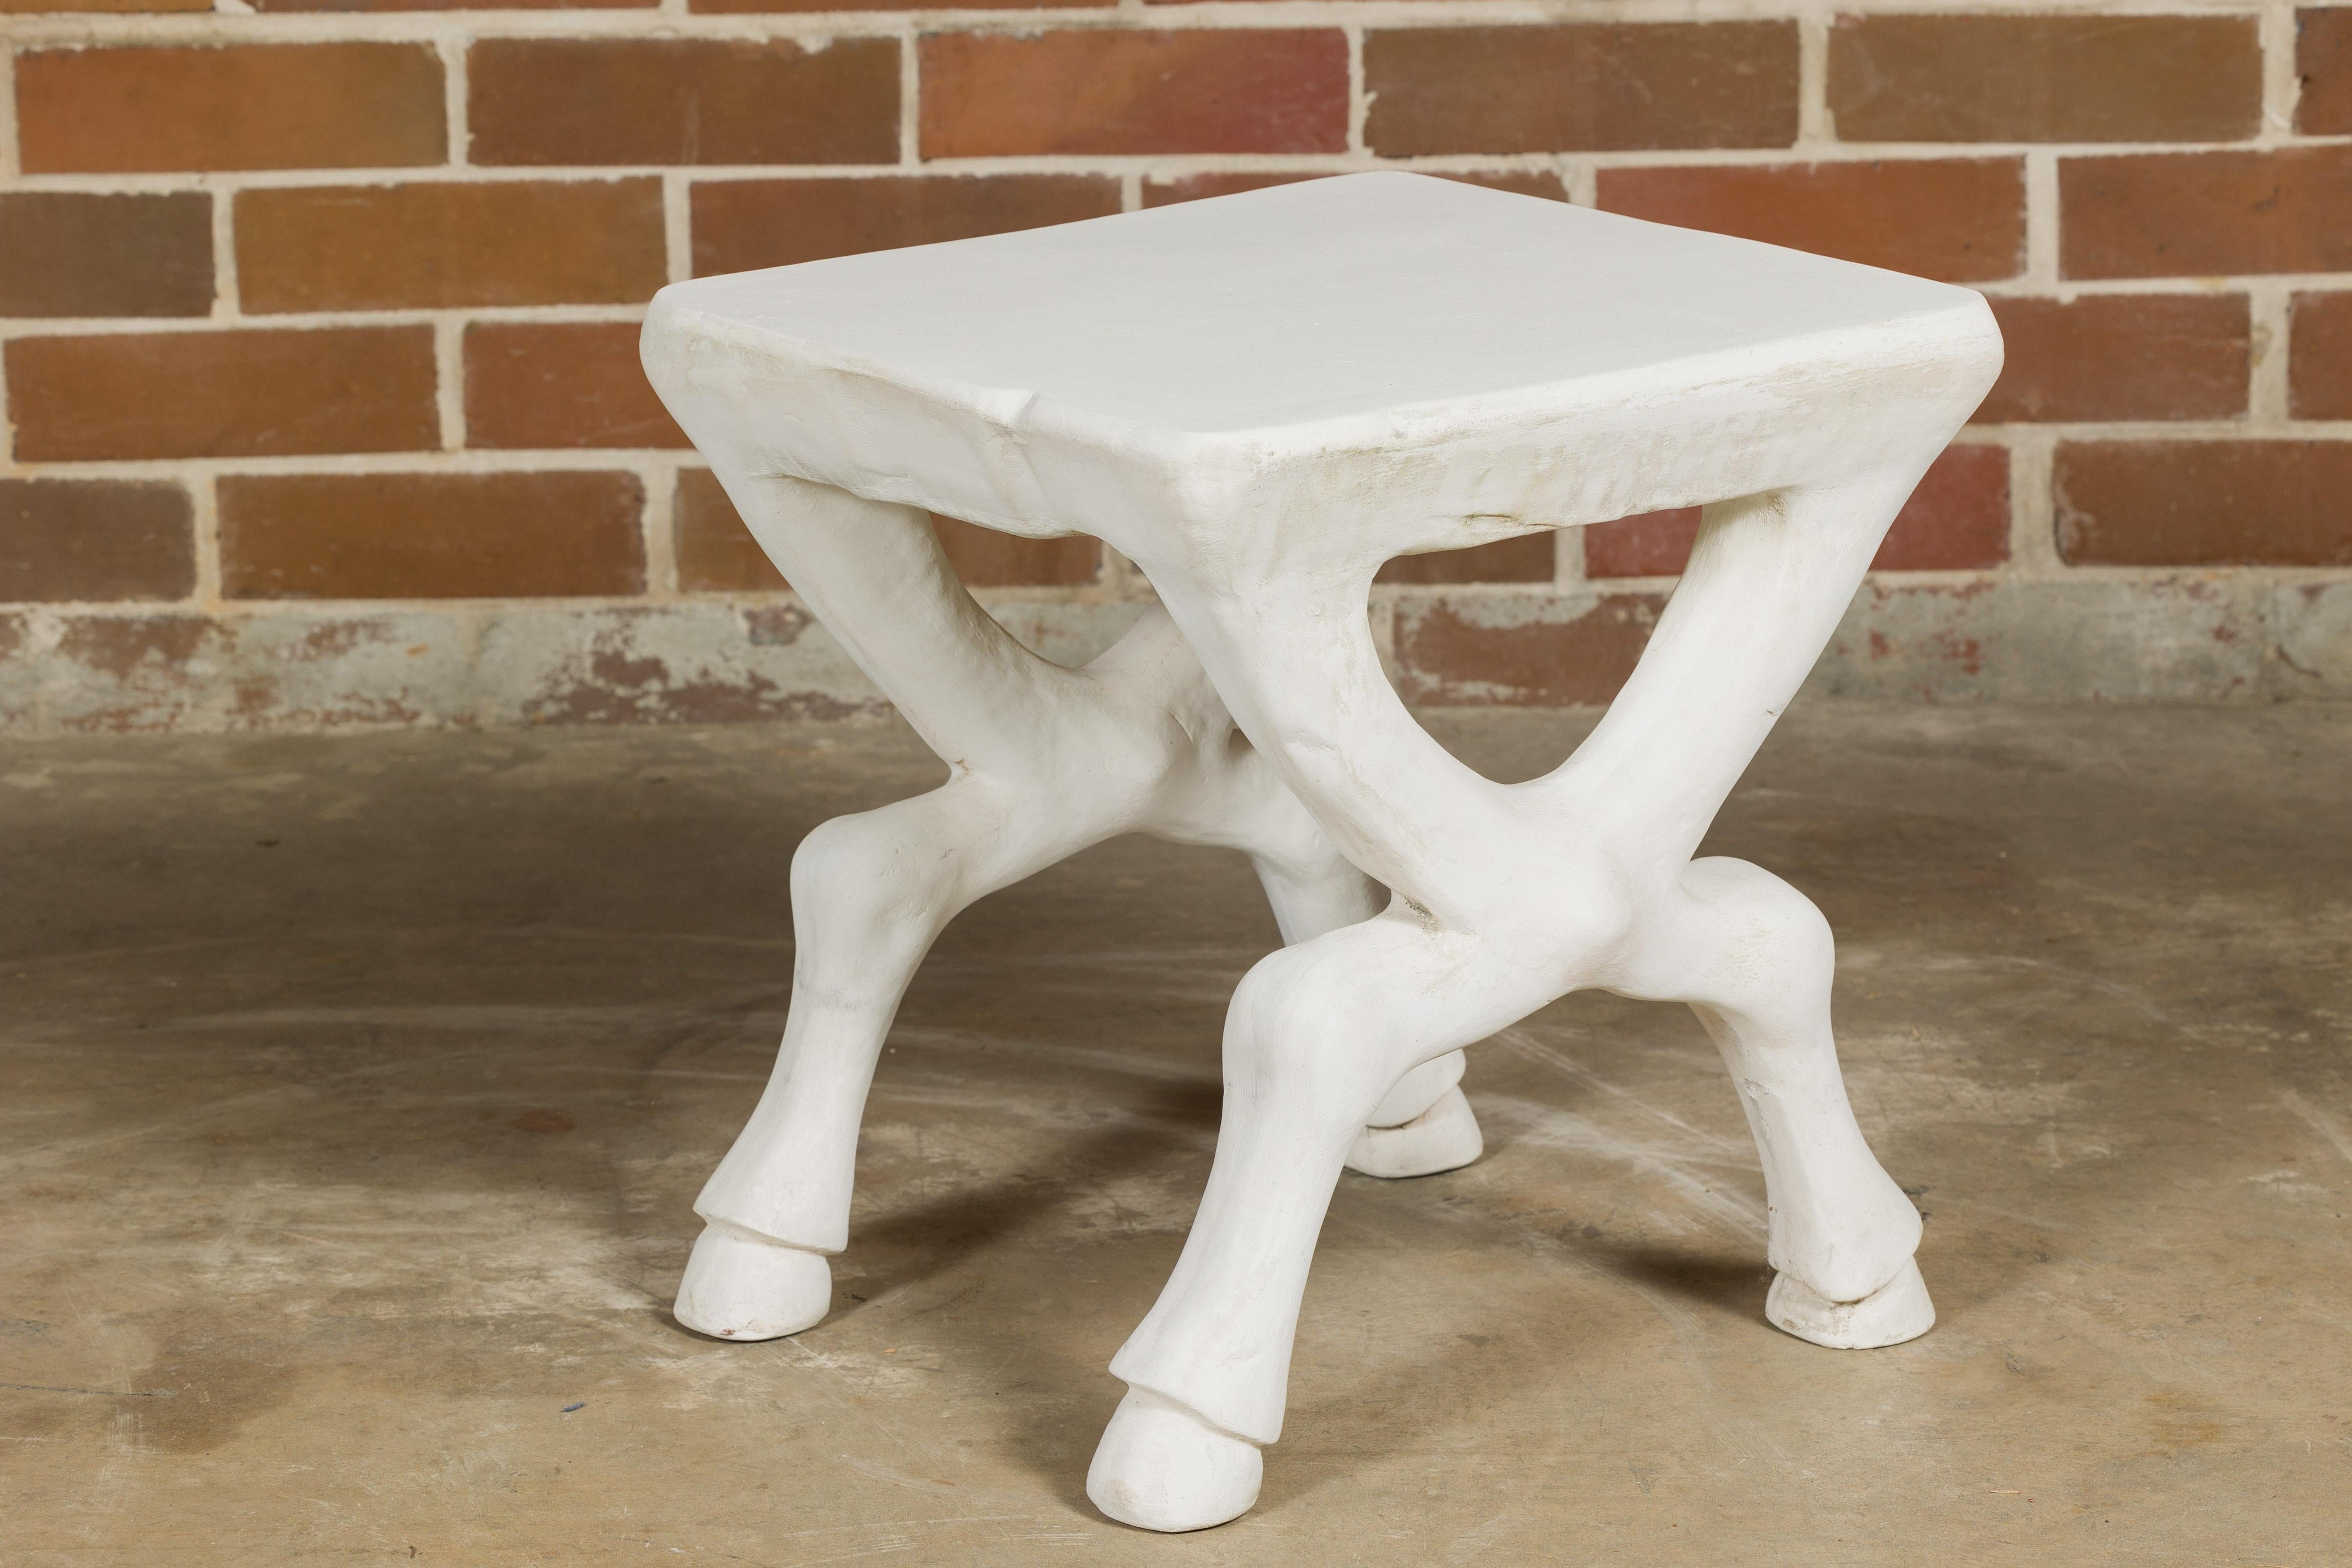 A signed John Dickinson plaster low side table from circa 1970 with white finish, X-Form base and hoof feet. This iconic John Dickinson plaster low side table, dating back to around 1970, exudes a timeless elegance with its distinctive design.